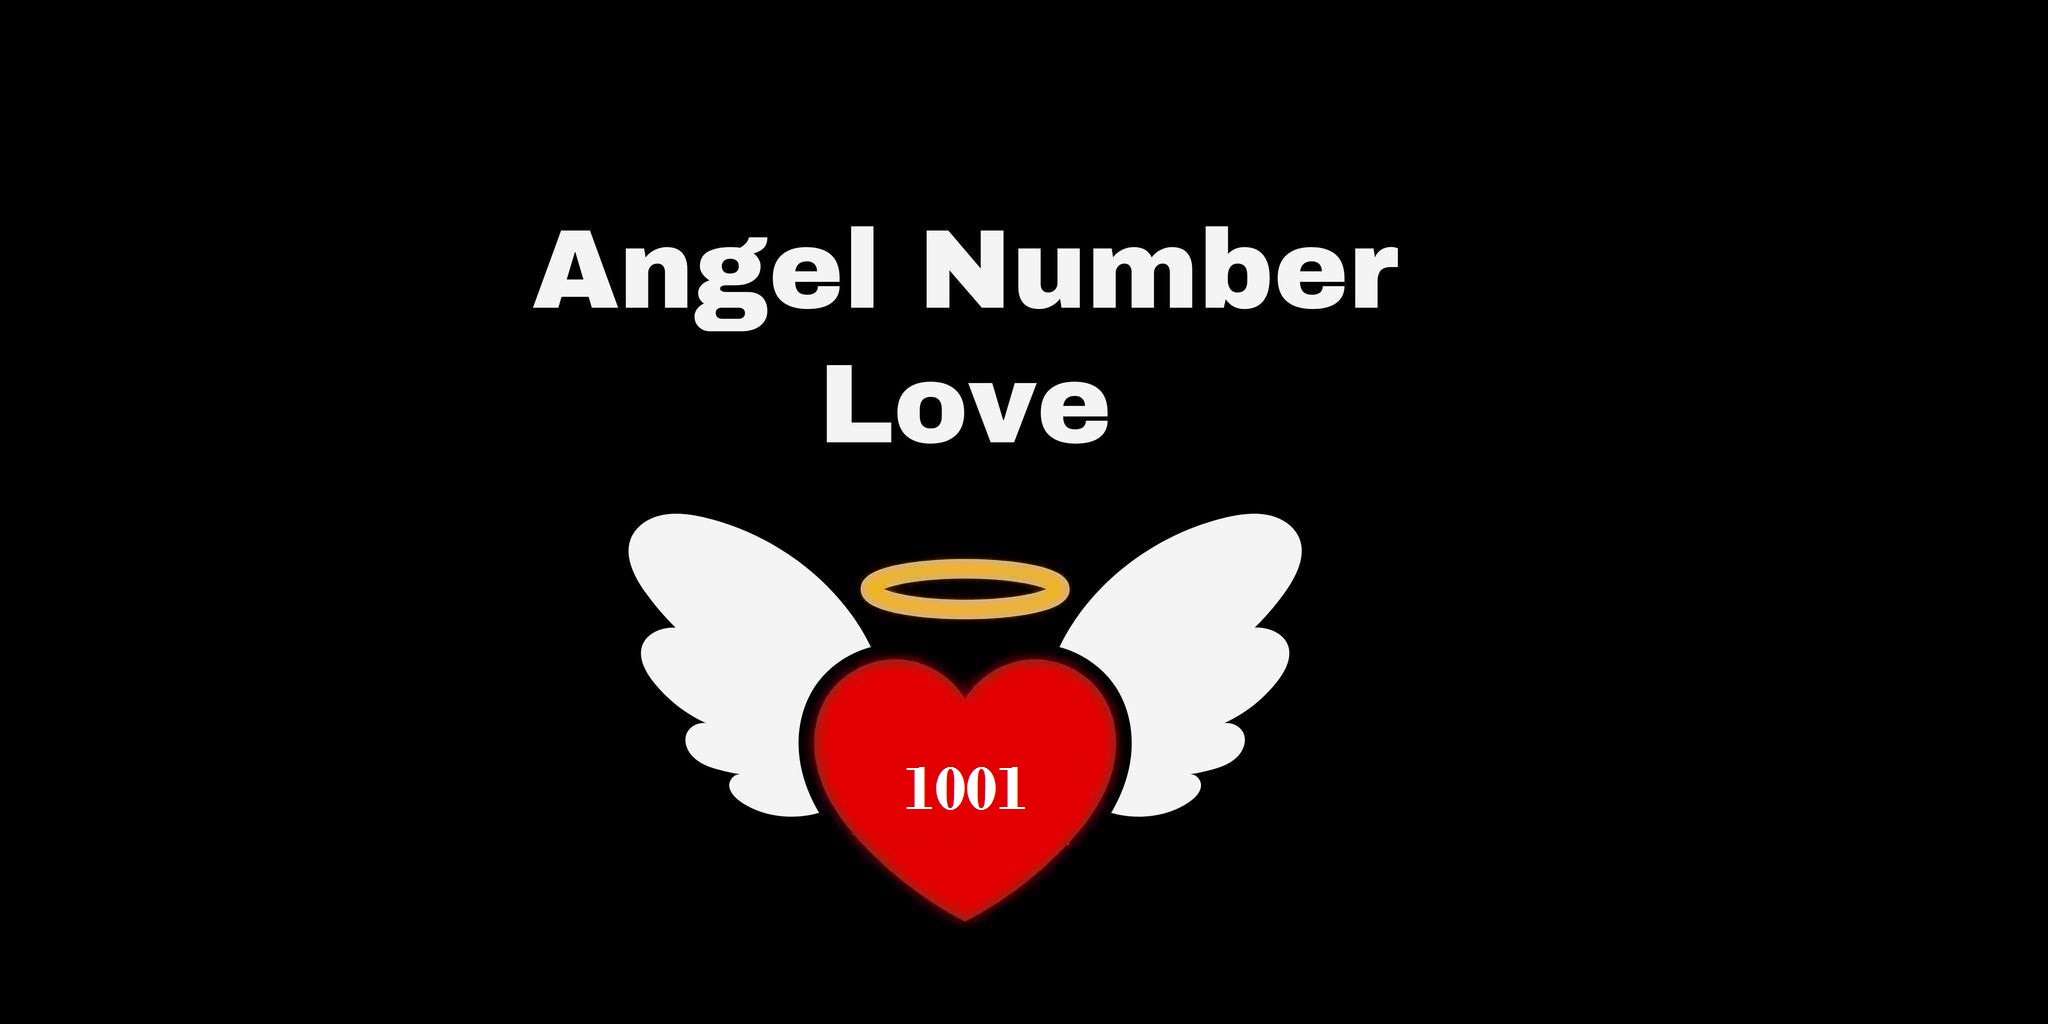 1001 Angel Number Meaning In Love